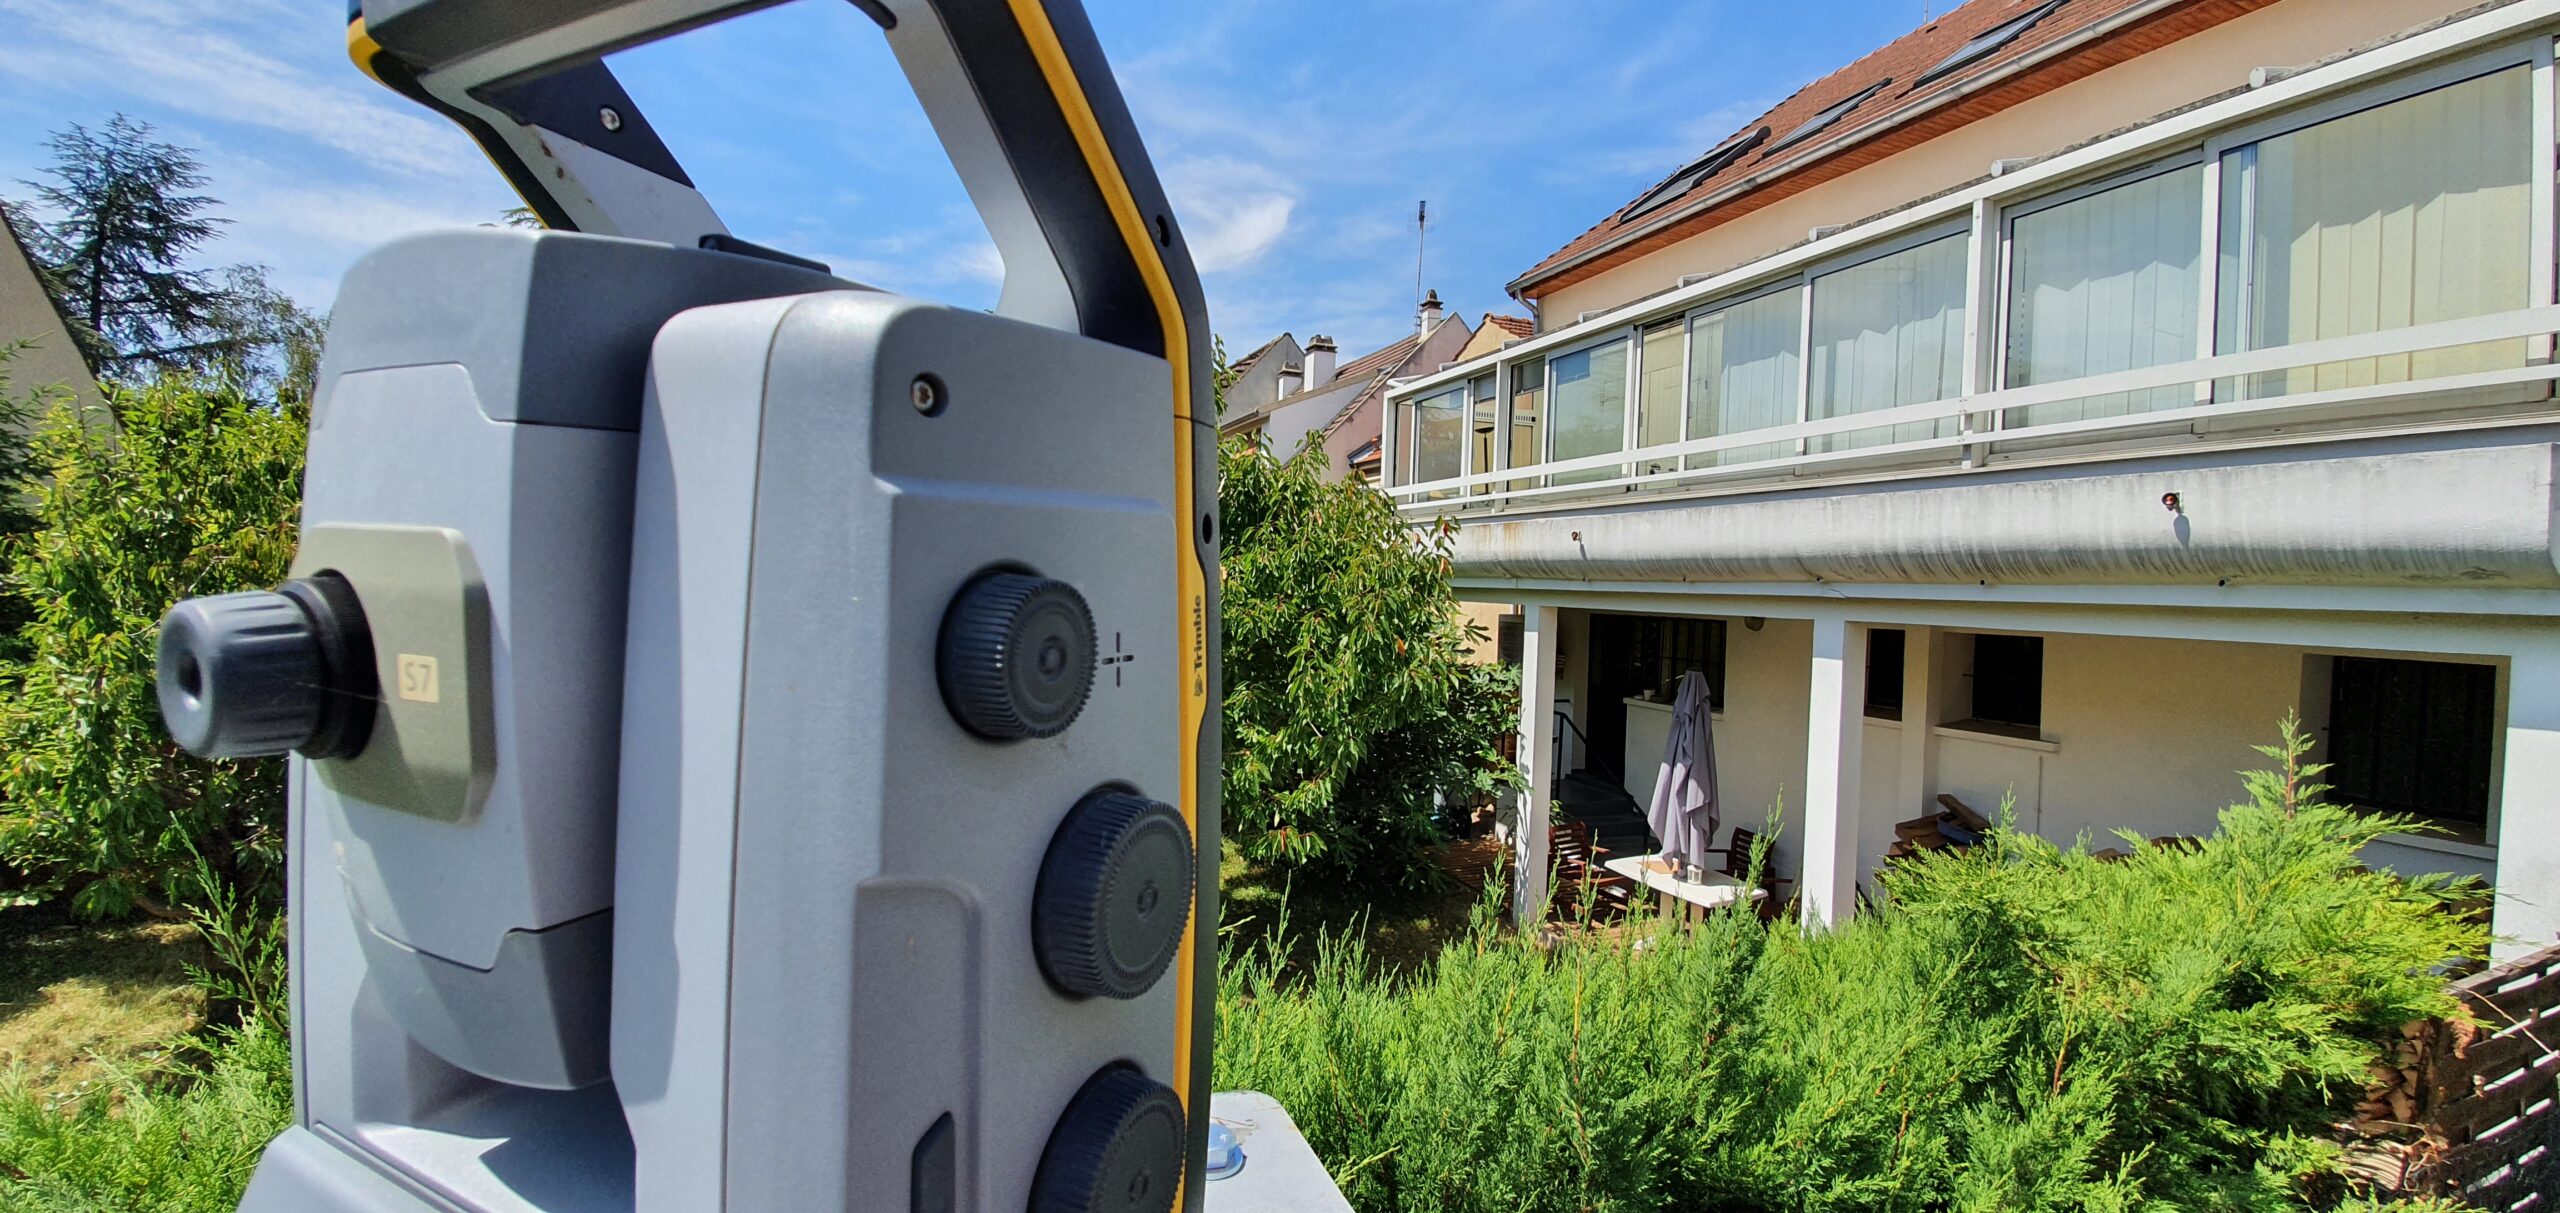 Trimble S7 monitor prisms attached to residential buildings in the L15B construction zone. Photo credit: Filipe Afonso, Eiffage GC